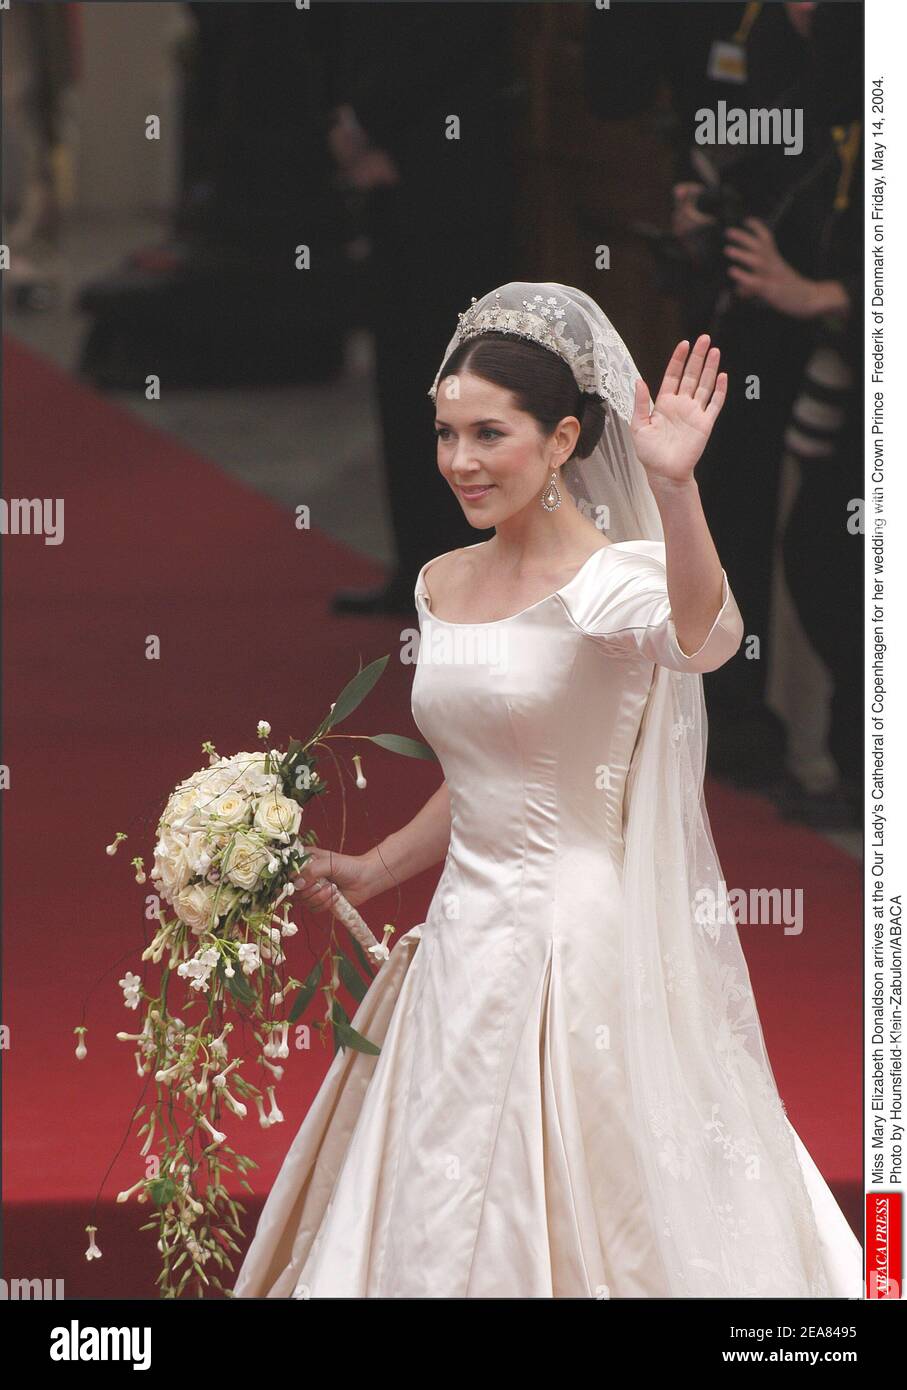 Miss Mary Elizabeth Donaldson arrives at the Our Lady's Cathedral of Copenhagen for her wedding with Crown Prince Frederik of Denmark on Friday, May 14, 2004. Photo by Hounsfield-Klein-Zabulon/ABACA Stock Photo